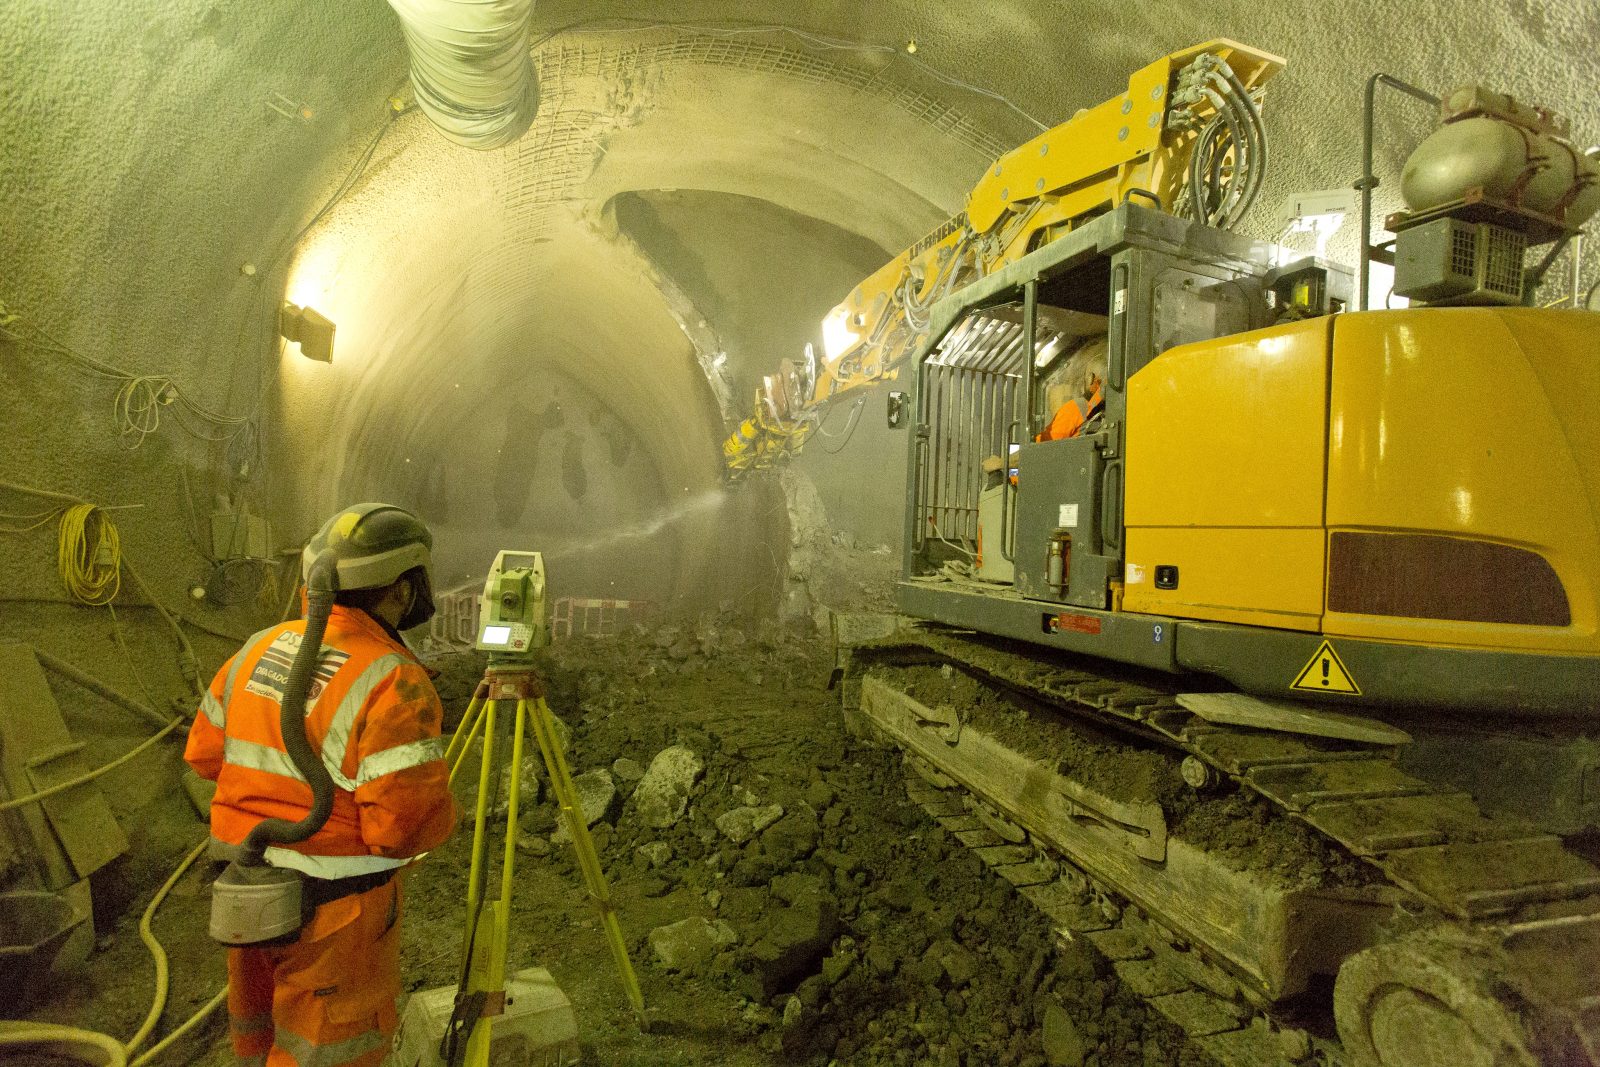 Crossrail Tunnelling, materials being excavated